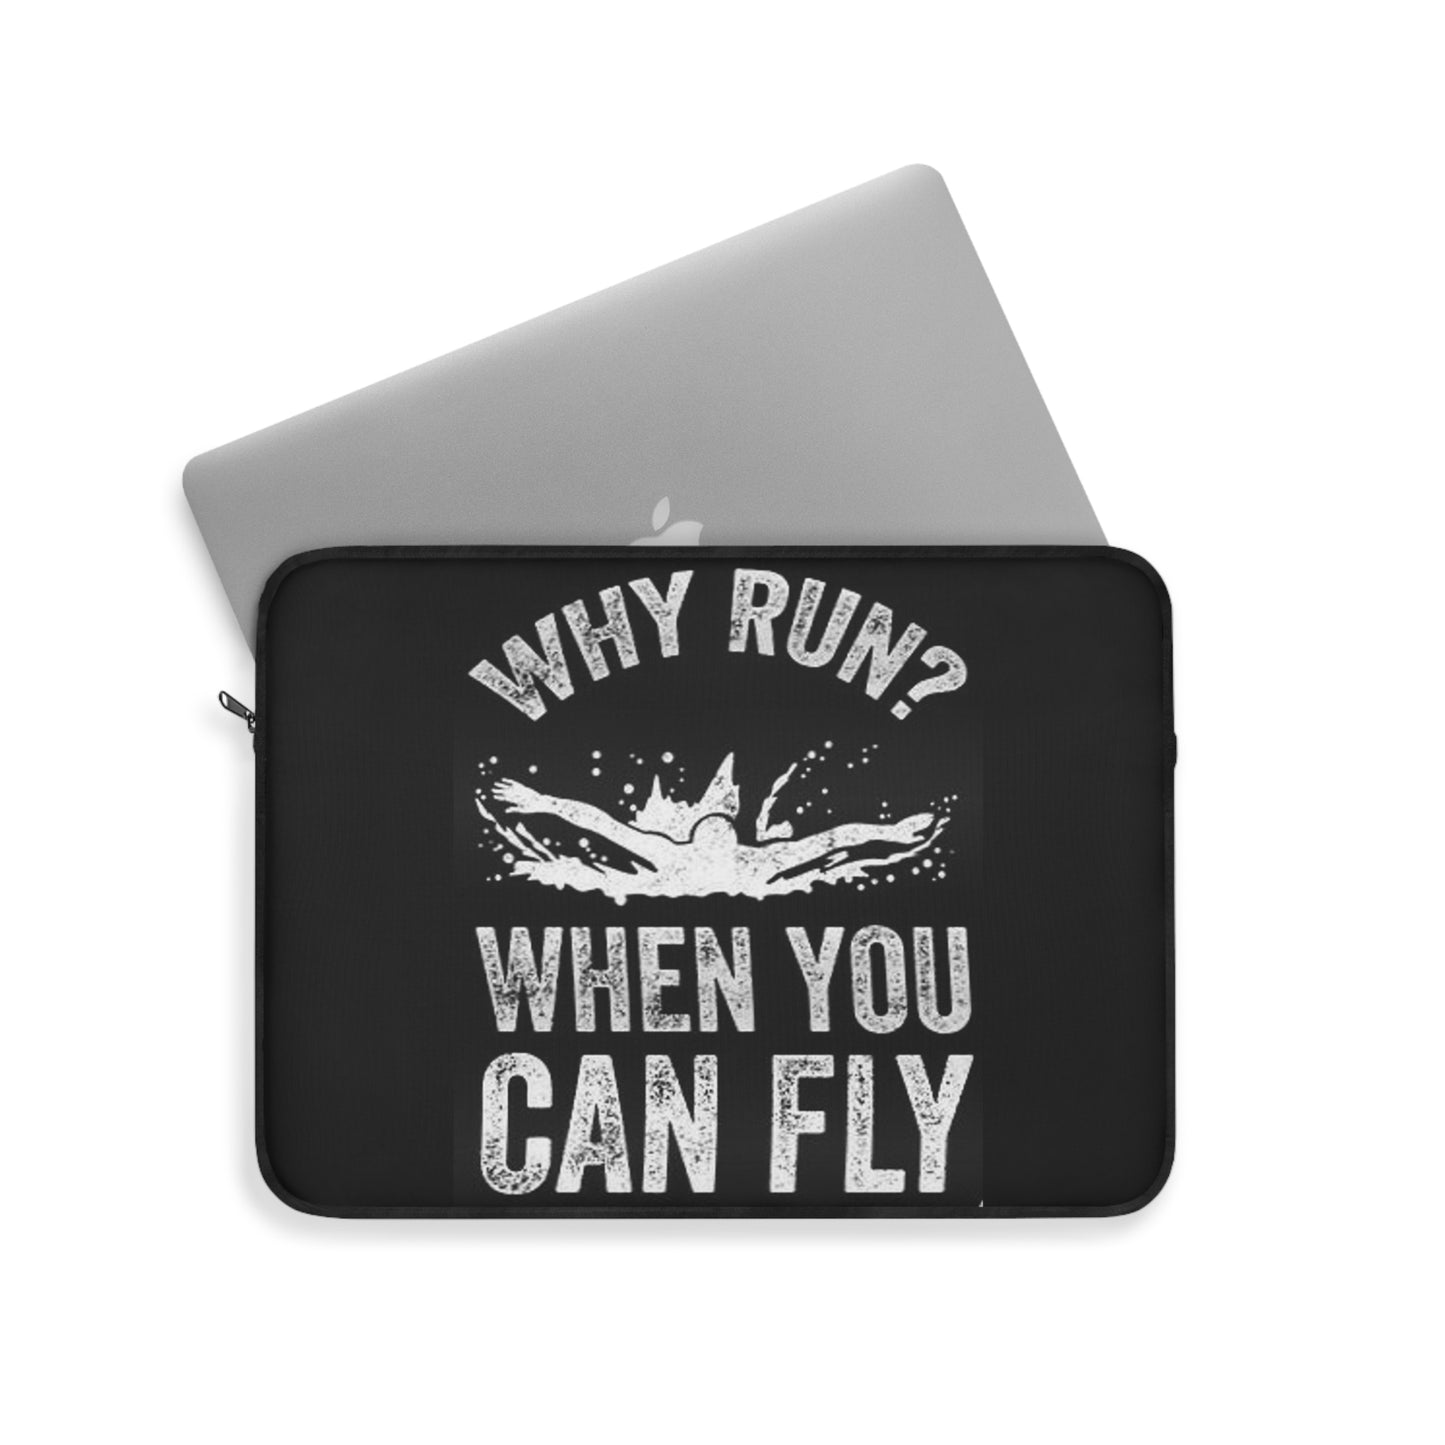 You Can Fly: Laptop Sleeve